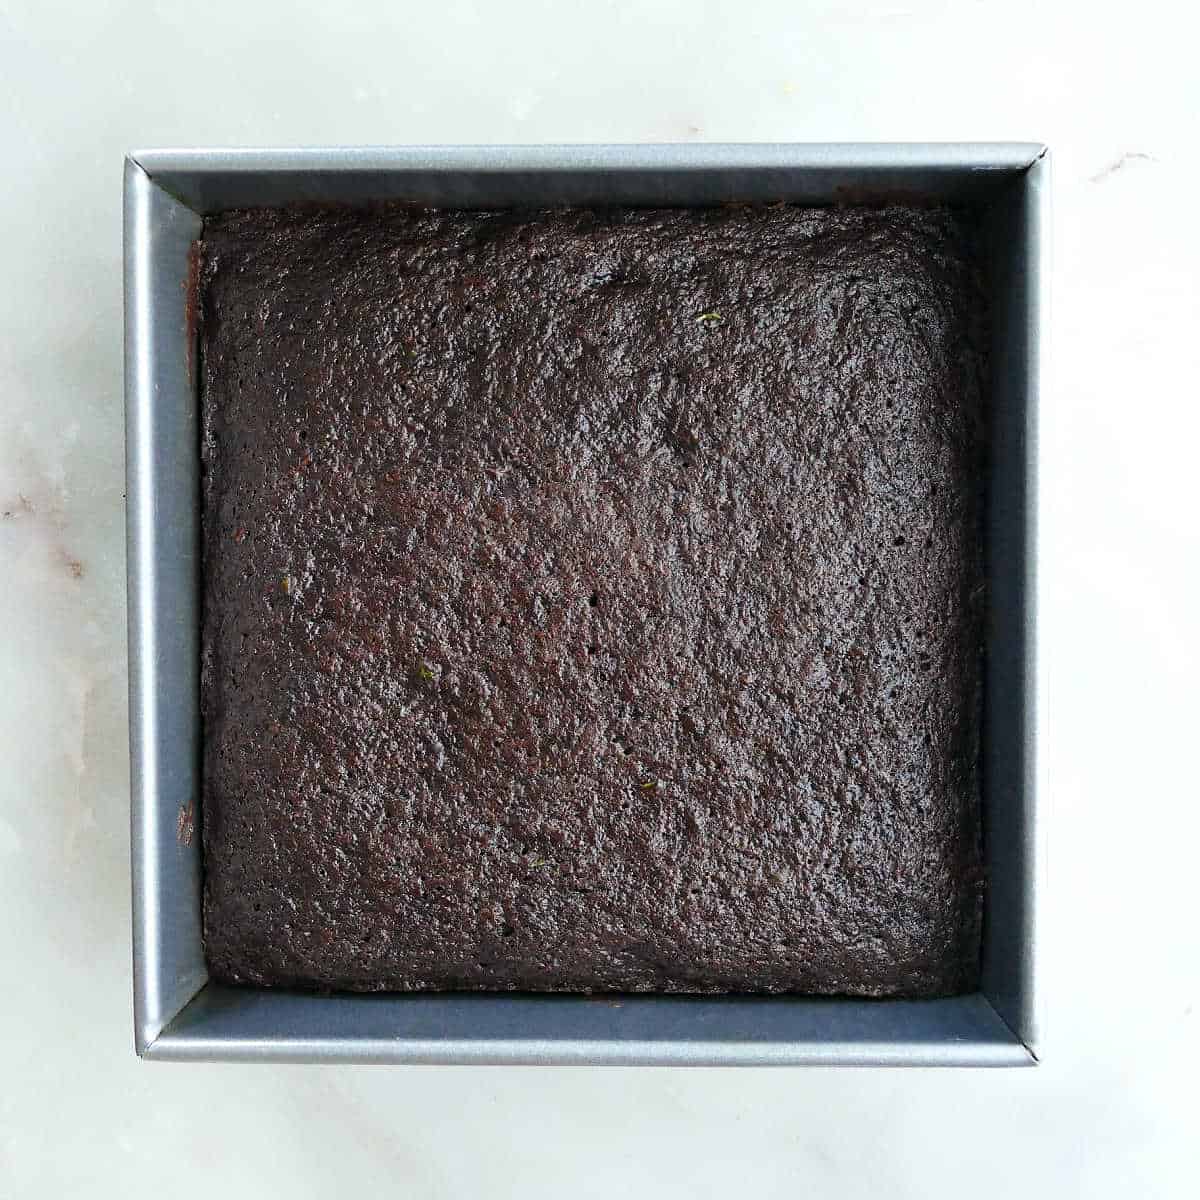 veggie brownies in a square baking dish after being baked on a counter